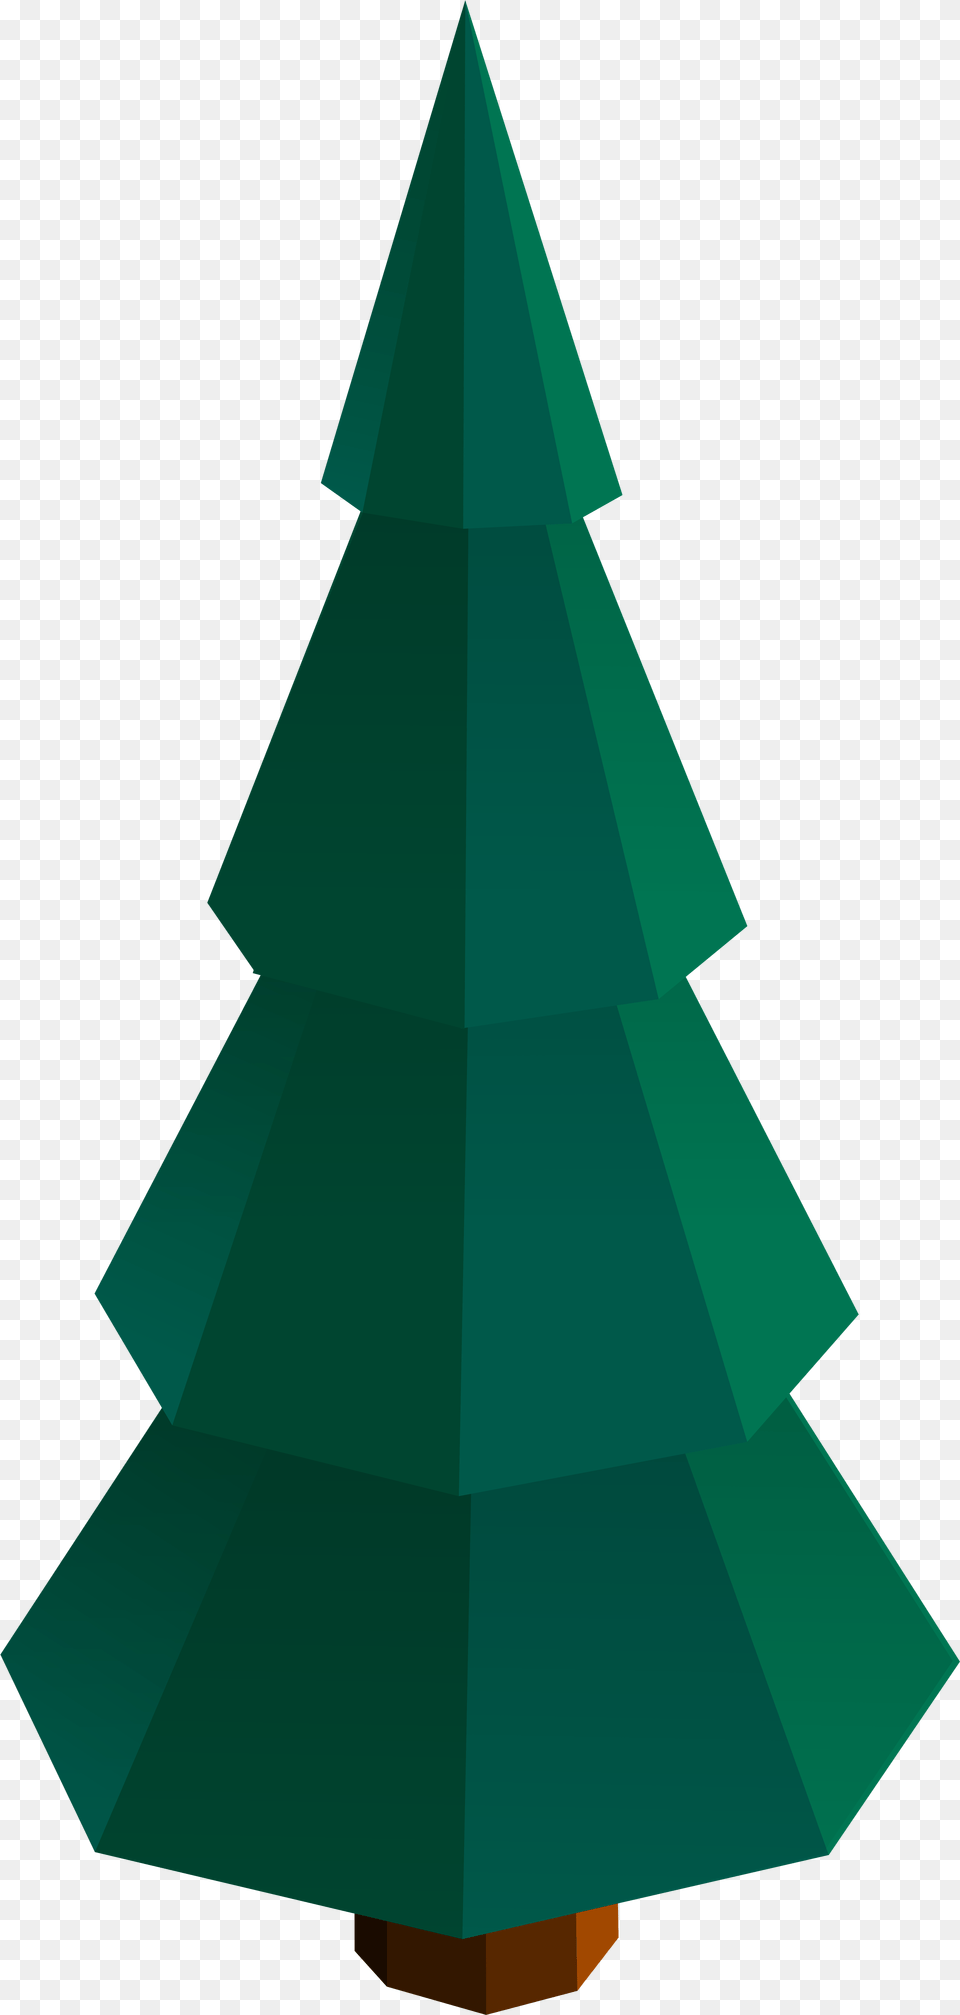 Pine Tree Clip Art Christmas Tree, Christmas Decorations, Festival, Rocket, Weapon Free Png